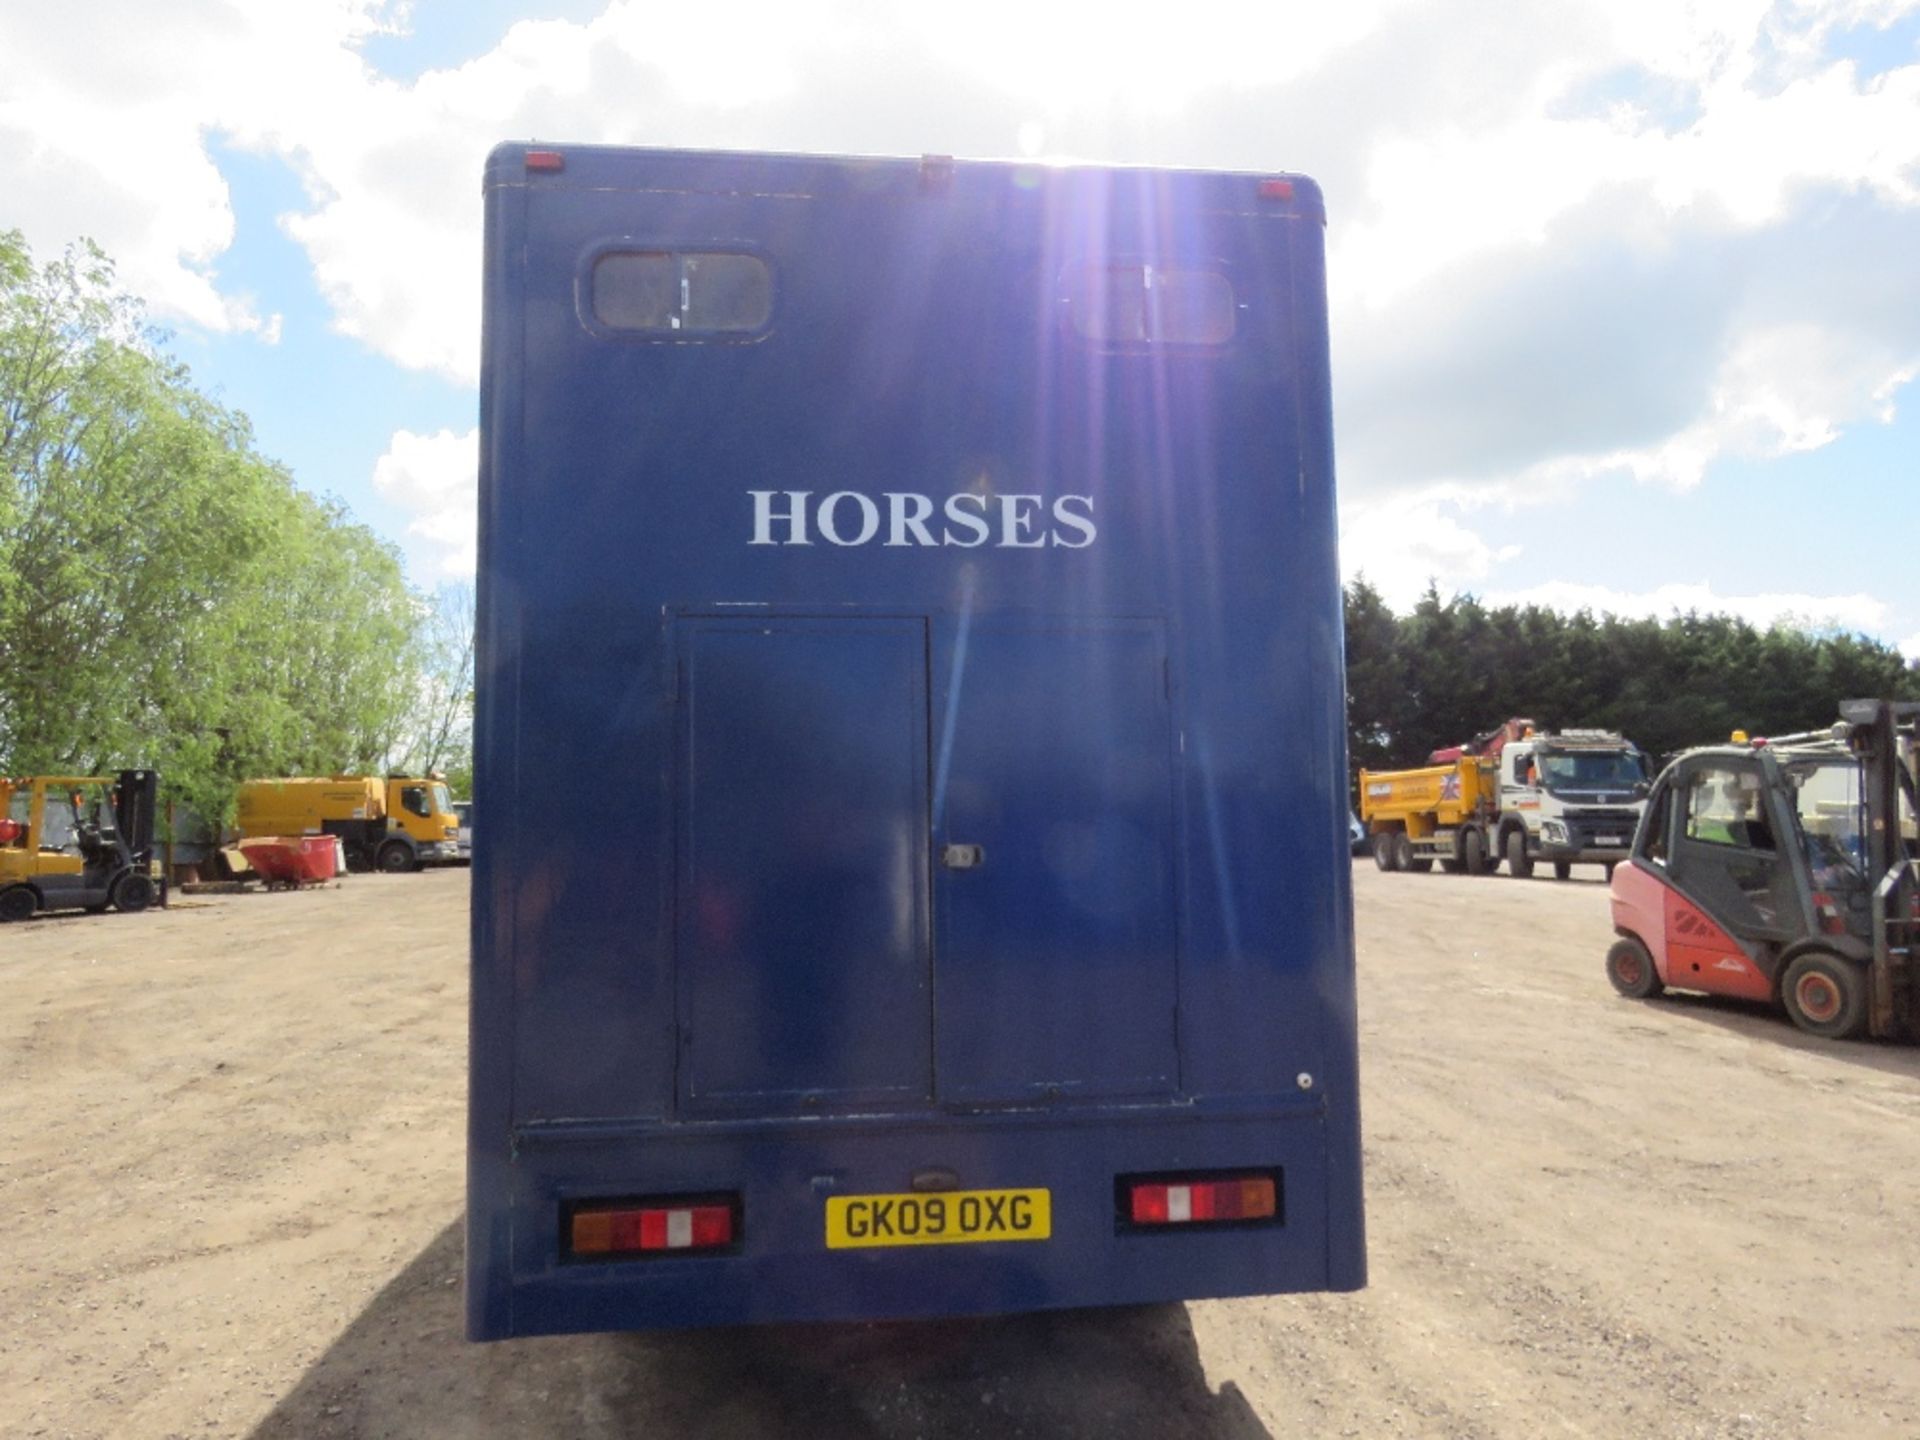 MITSUBISHI CANTER HORSE BOX LORRY REG:GK09 OXG. V5 AND PLATING CERTIFICATE IN OFFICE. MOT EXPIRED. - Bild 7 aus 24